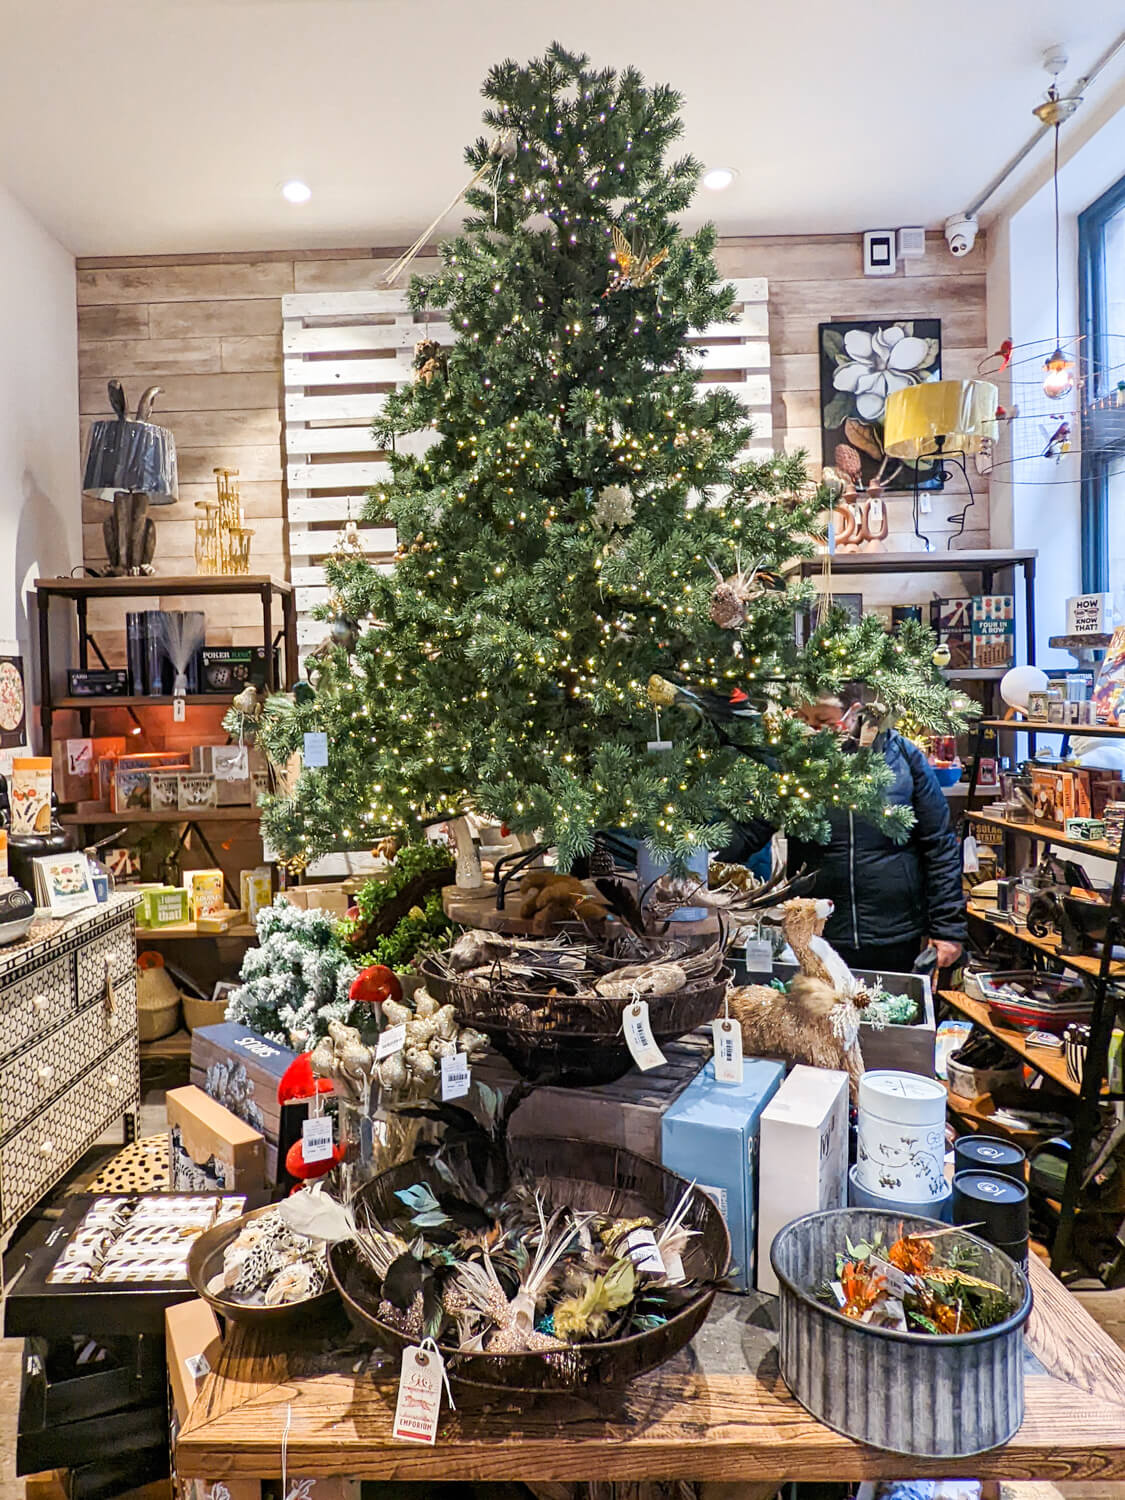 Where to Go Independent Shopping in Bath at Christmas